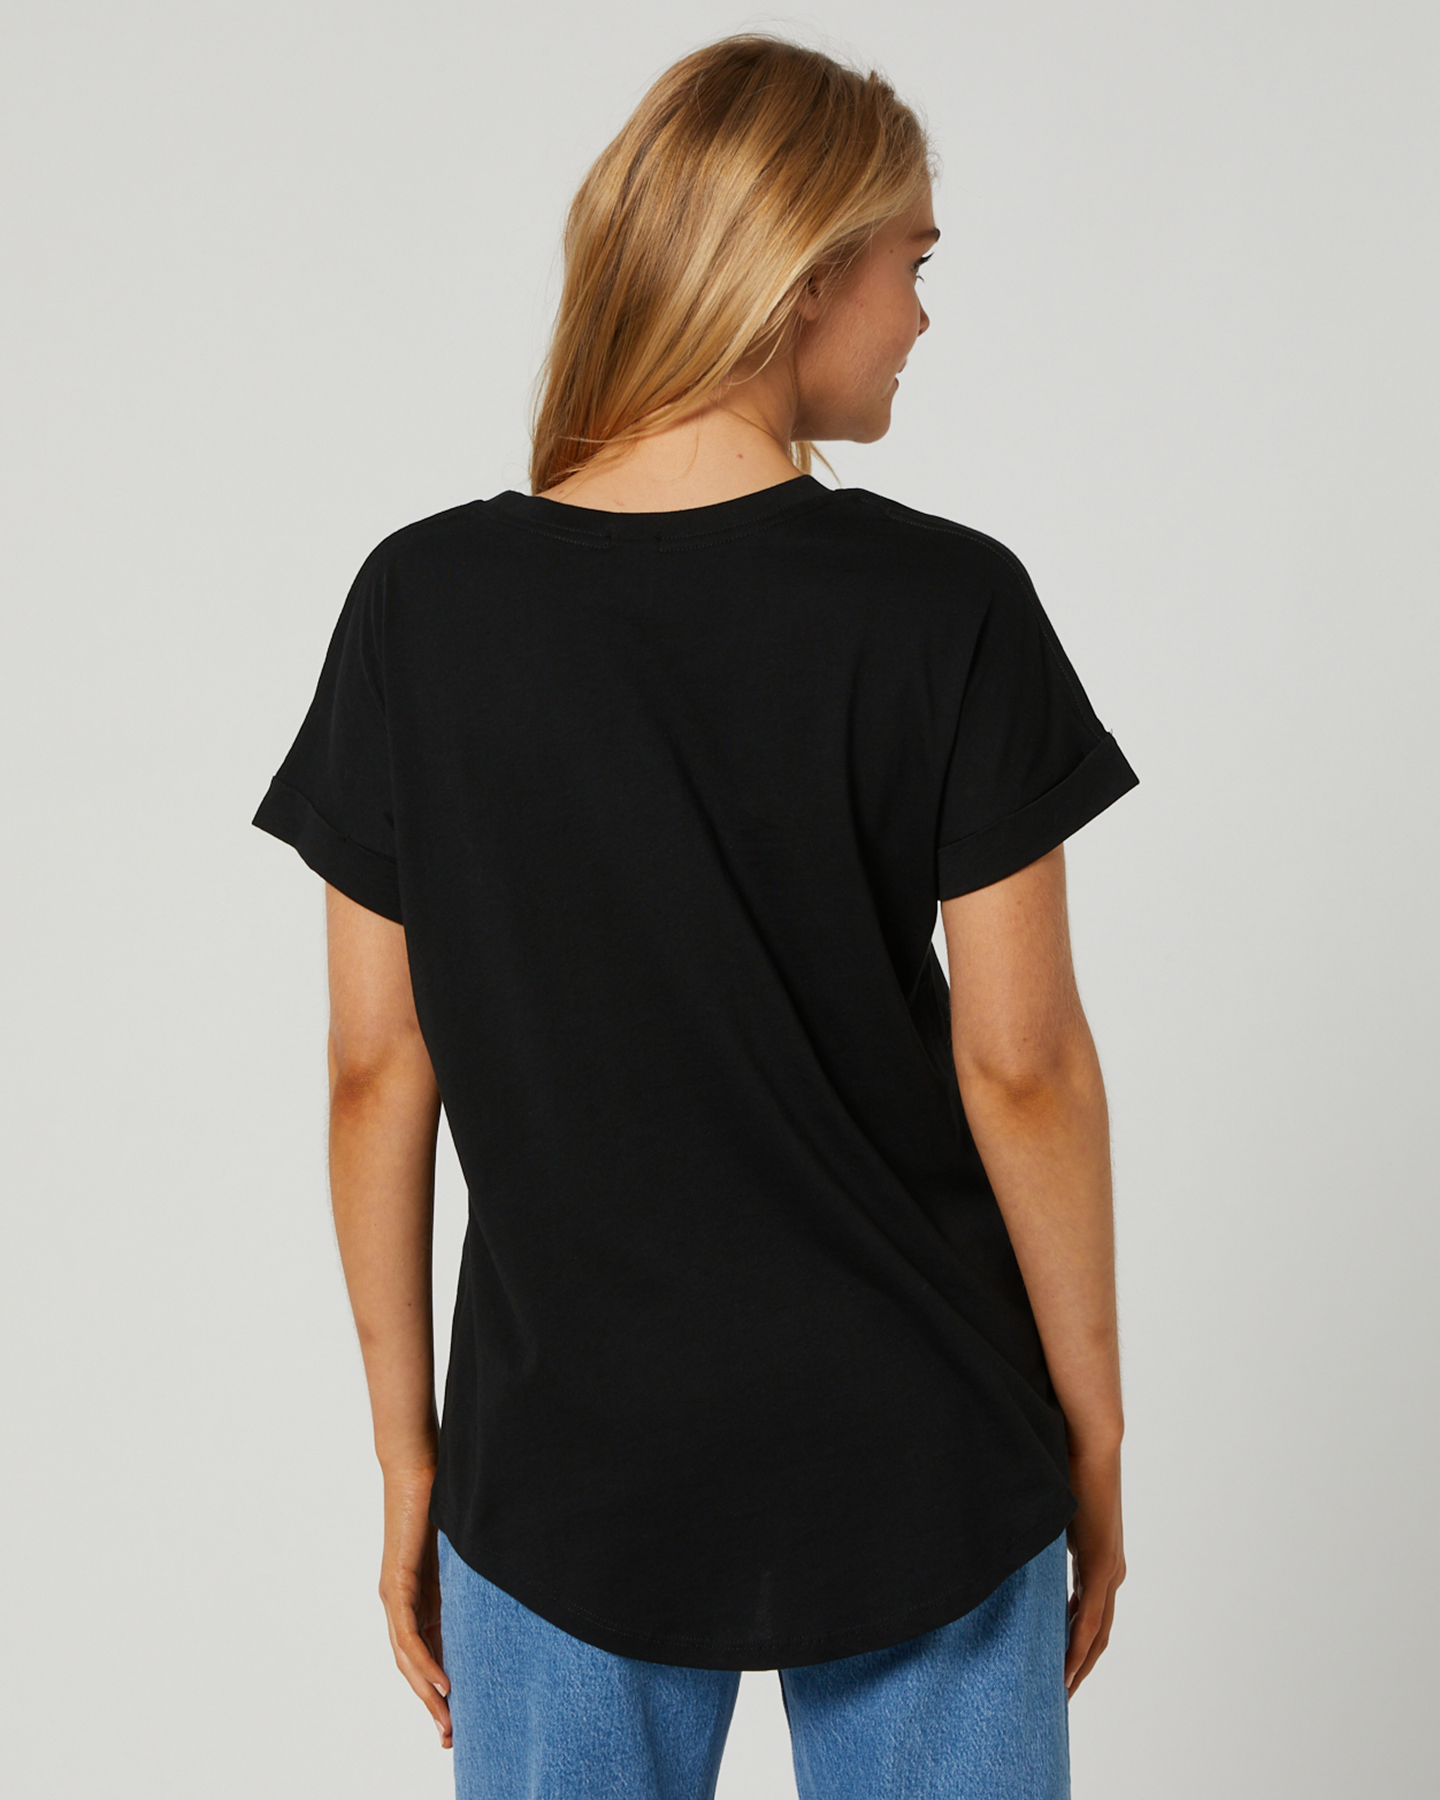 Rip Curl Plains Rolled Tee - Black | SurfStitch